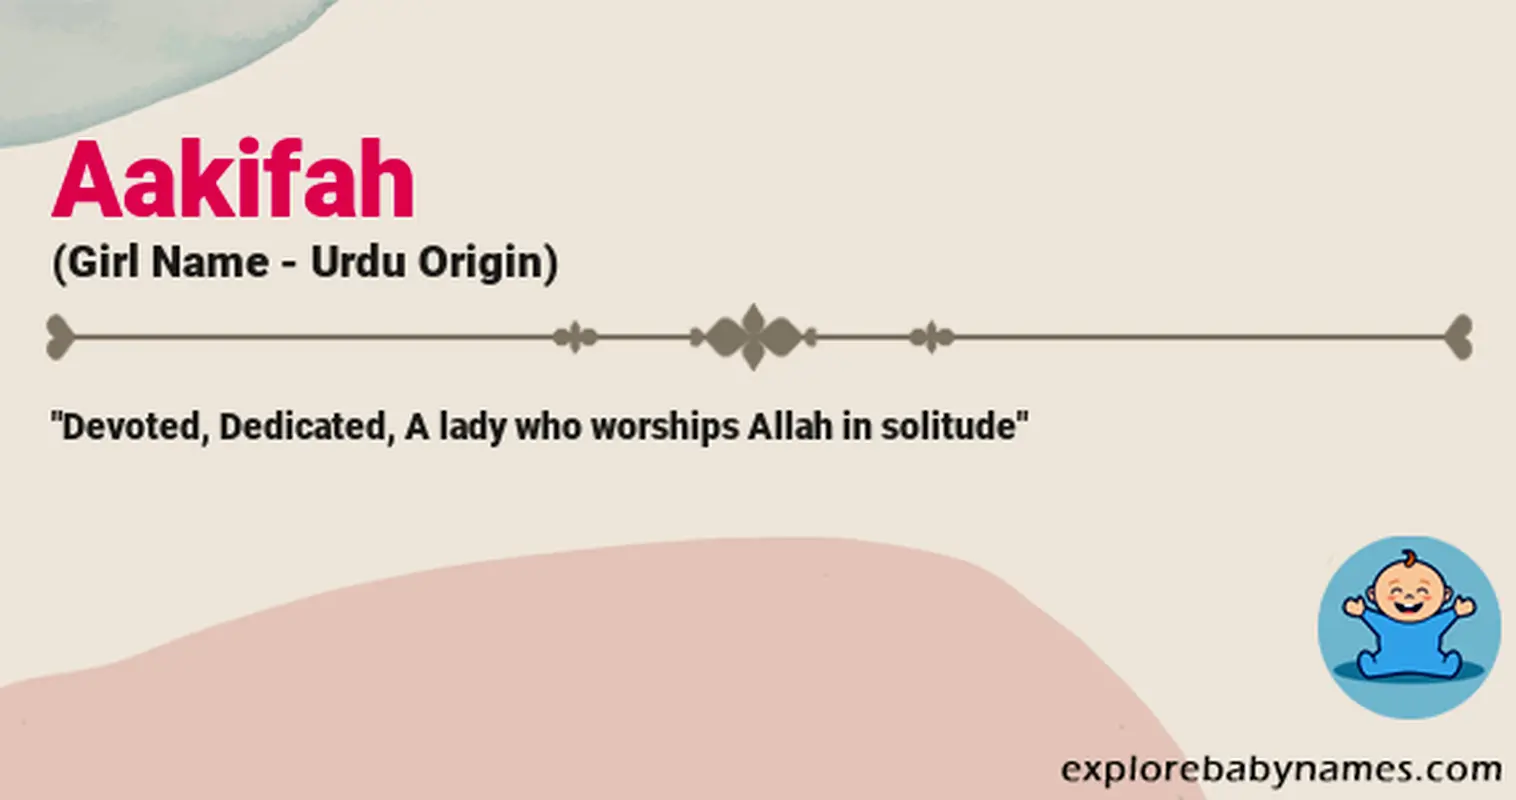 Meaning of Aakifah